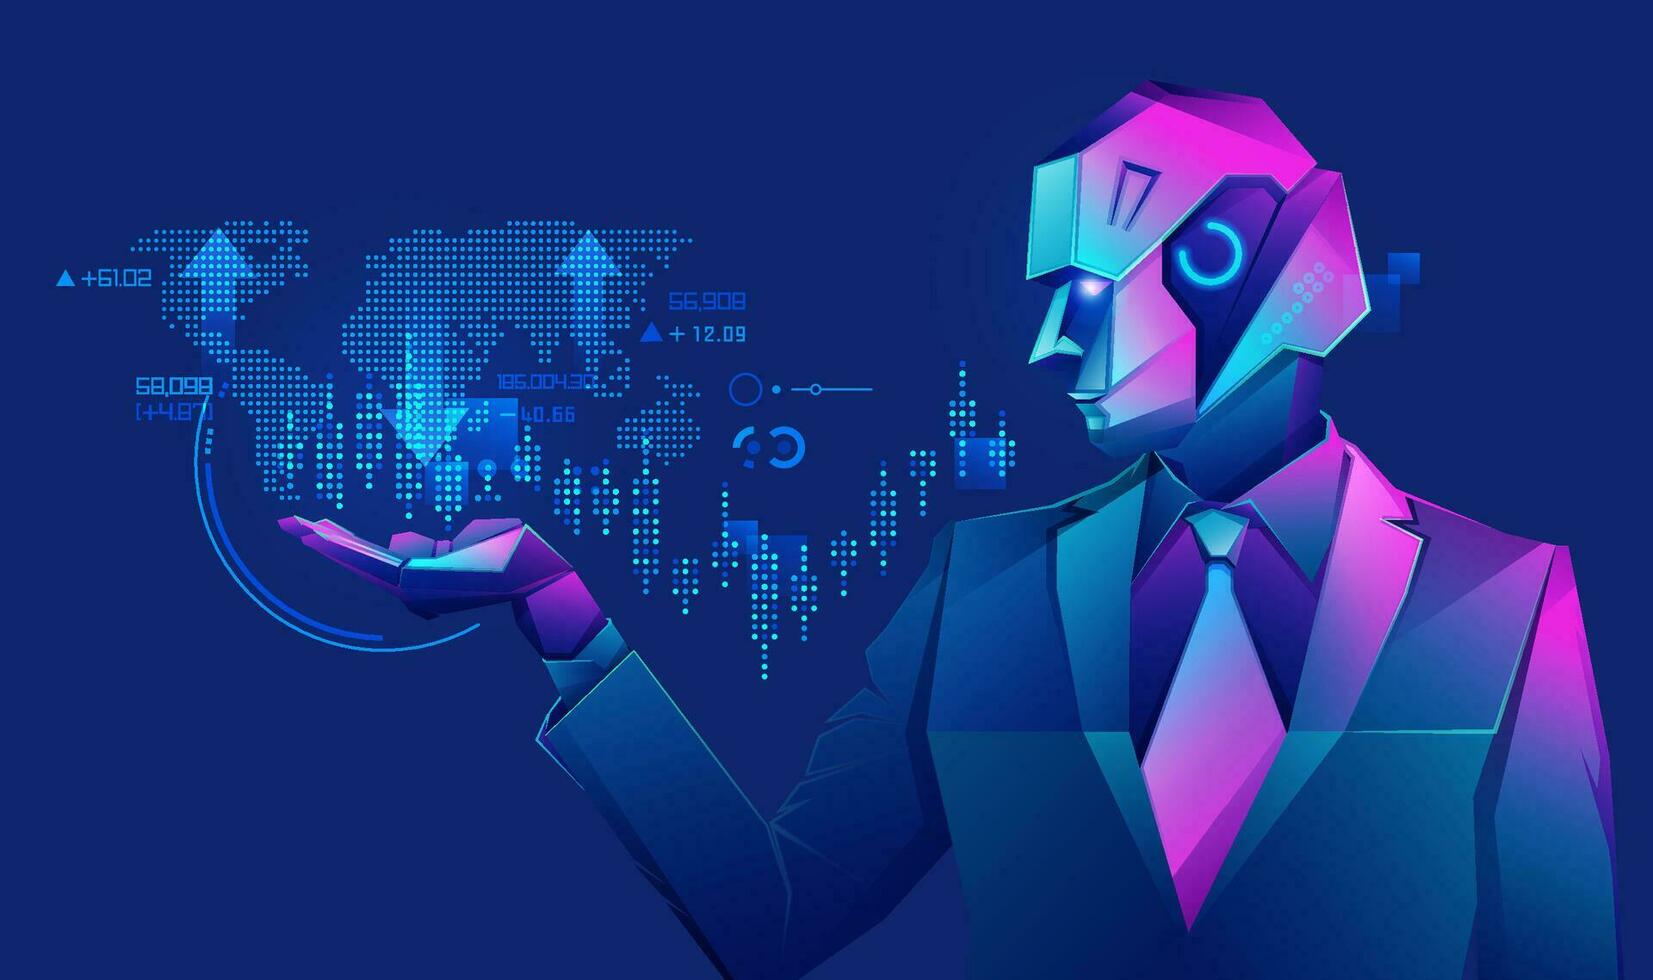 concept of robot trading technology, graphic of robot businessman using fintech interface presented in cyberpunk character style vector